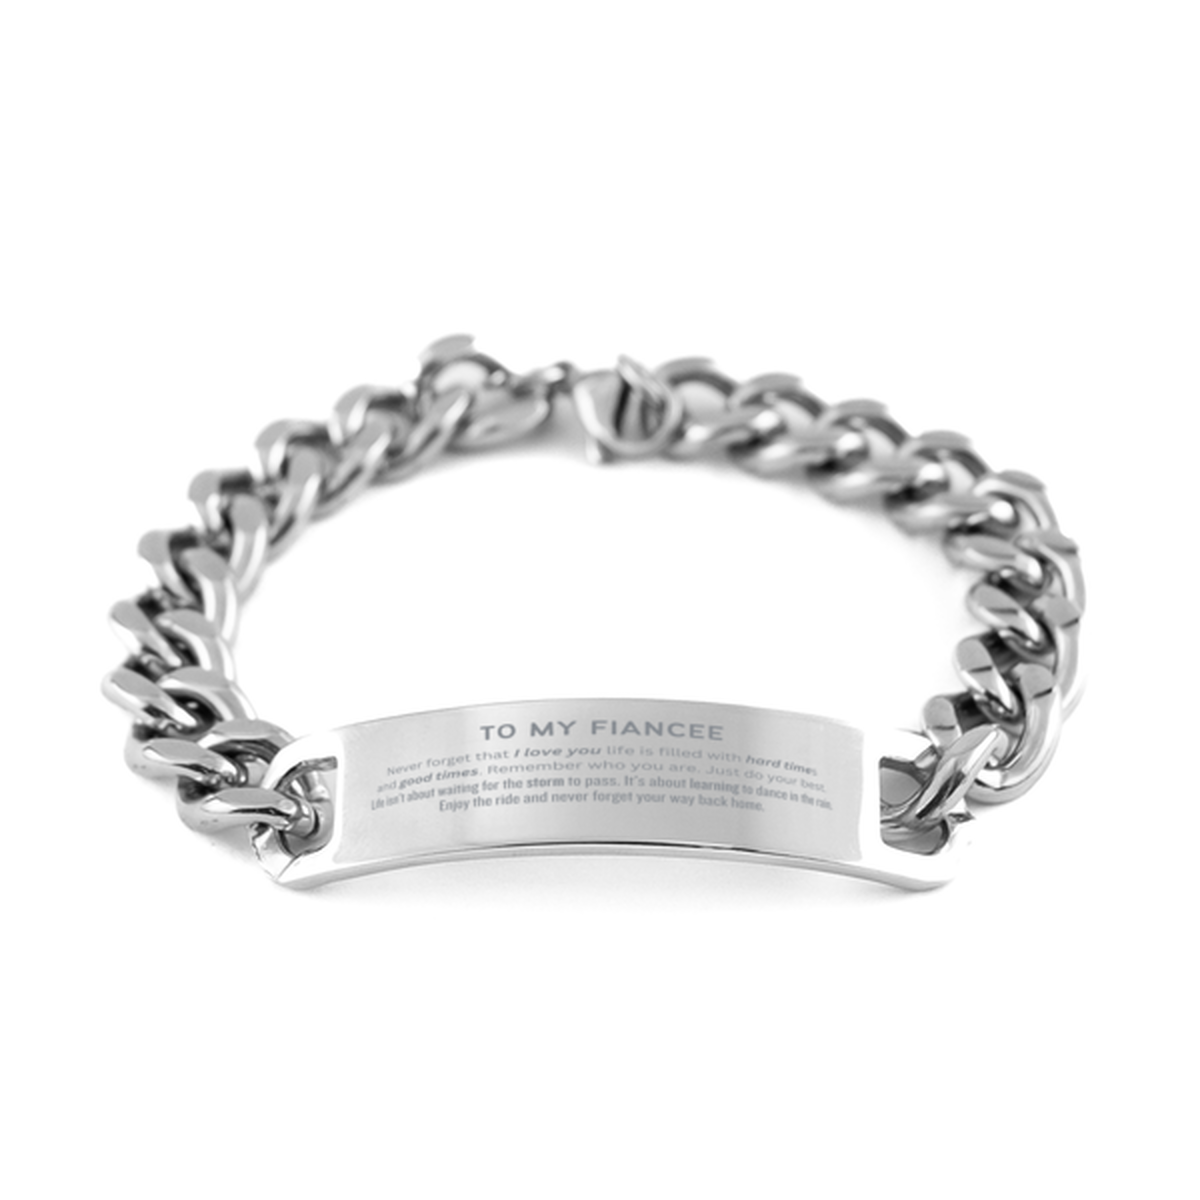 Christmas Fiancee Cuban Chain Stainless Steel Bracelet Gifts, To My Fiancee Birthday Thank You Gifts For Fiancee, Graduation Unique Gifts For Fiancee To My Fiancee Never forget that I love you life is filled with hard times and good times. Remember who yo